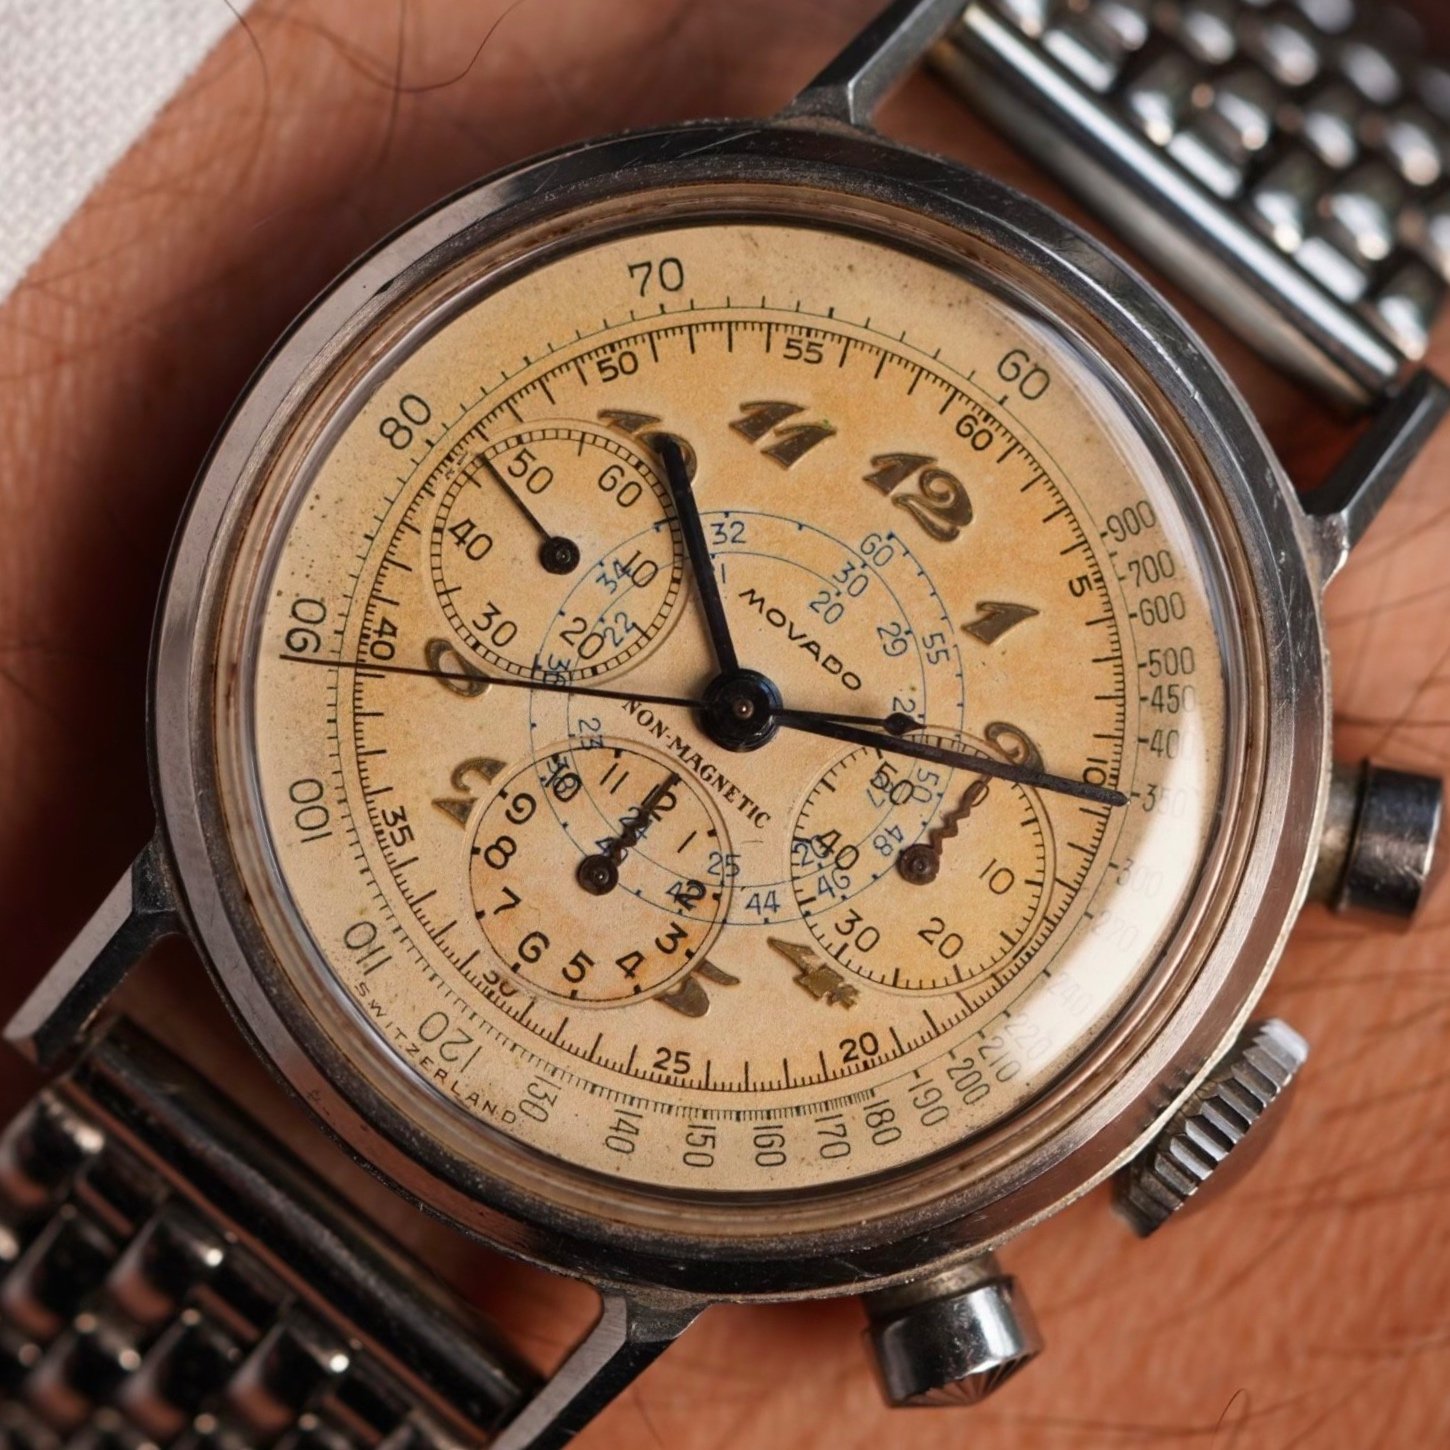 Movado Breguet Dial M95 Chronograph Reference 19018 Unpolished  